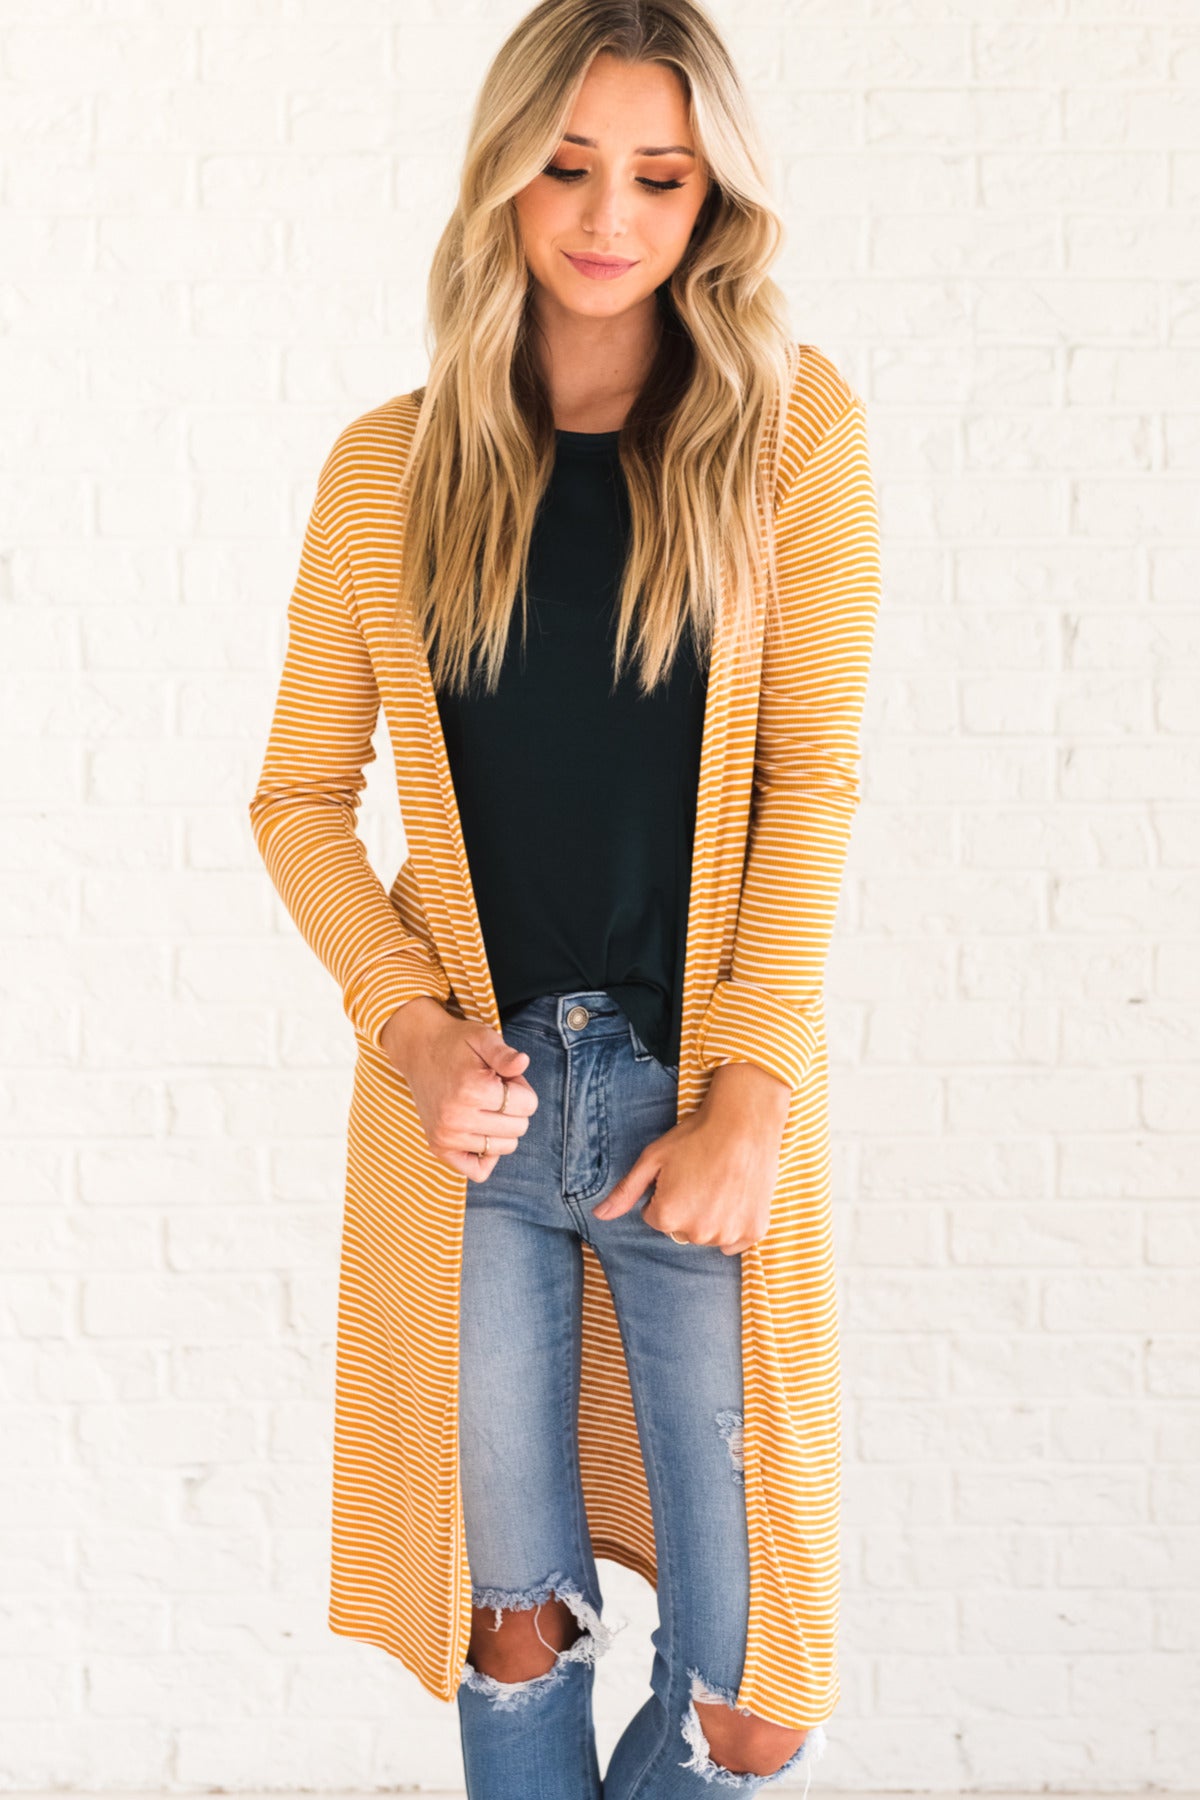 how to wear mustard yellow sweater